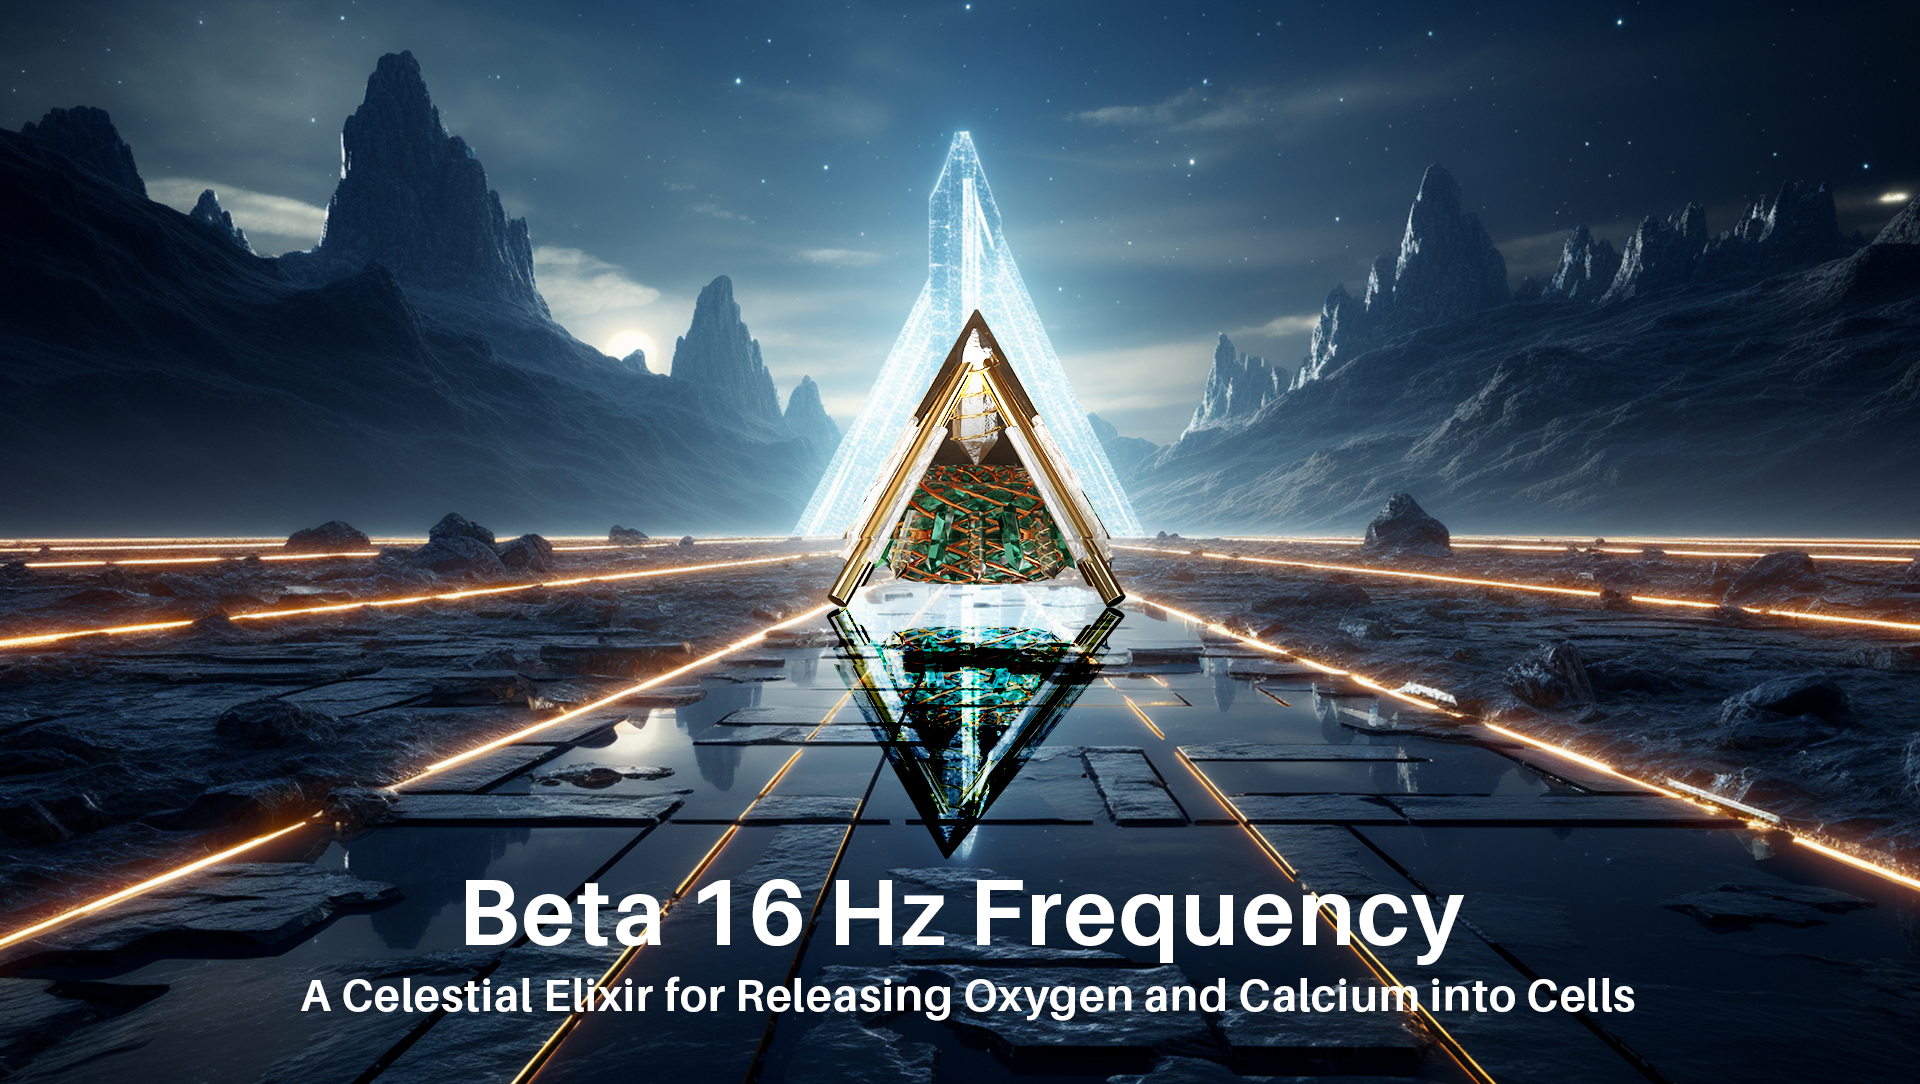 Beta 16 Hz Frequency – A Celestial Elixir for Releasing Oxygen and Calcium into Cells